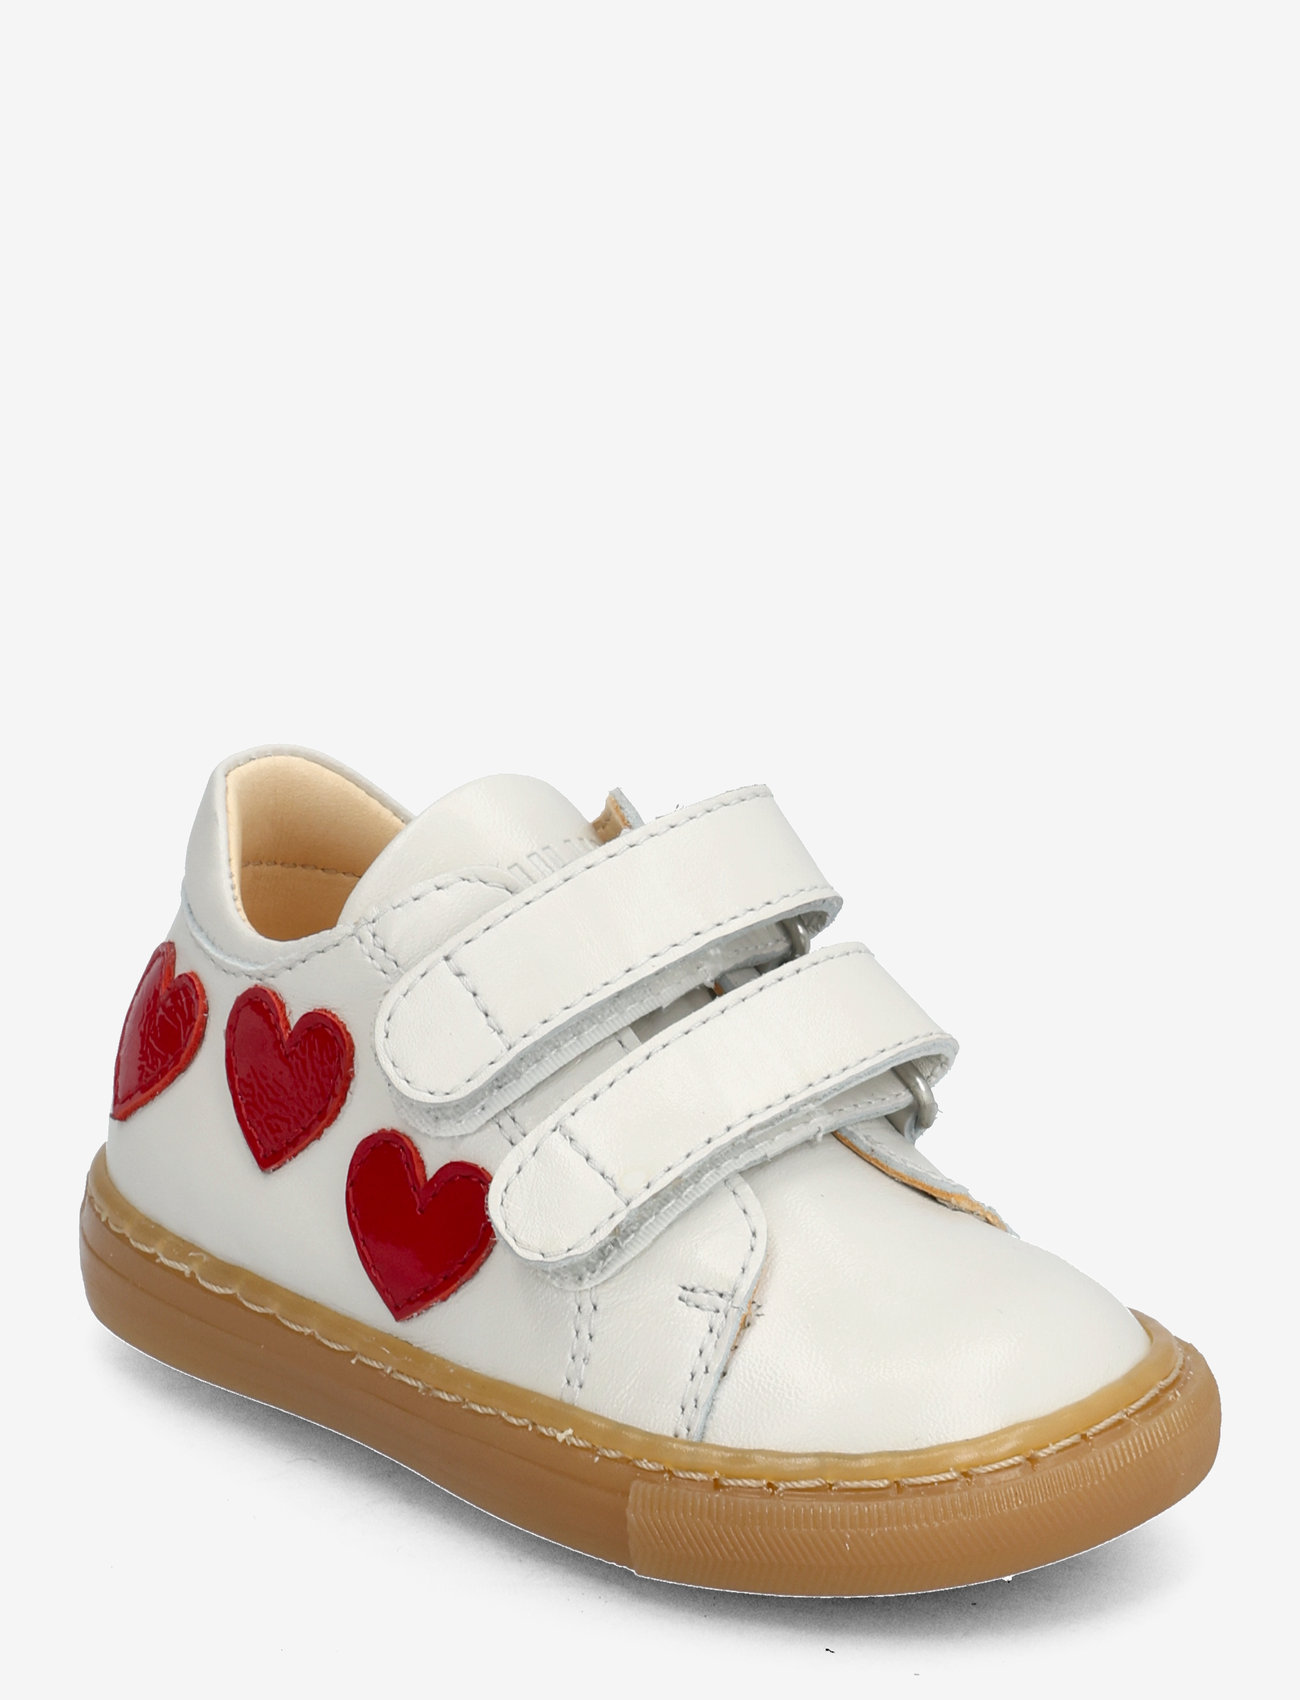 ANGULUS - Shoes - flat - with velcro - zomerkoopjes - 1493/a003 off white/hearts - 0